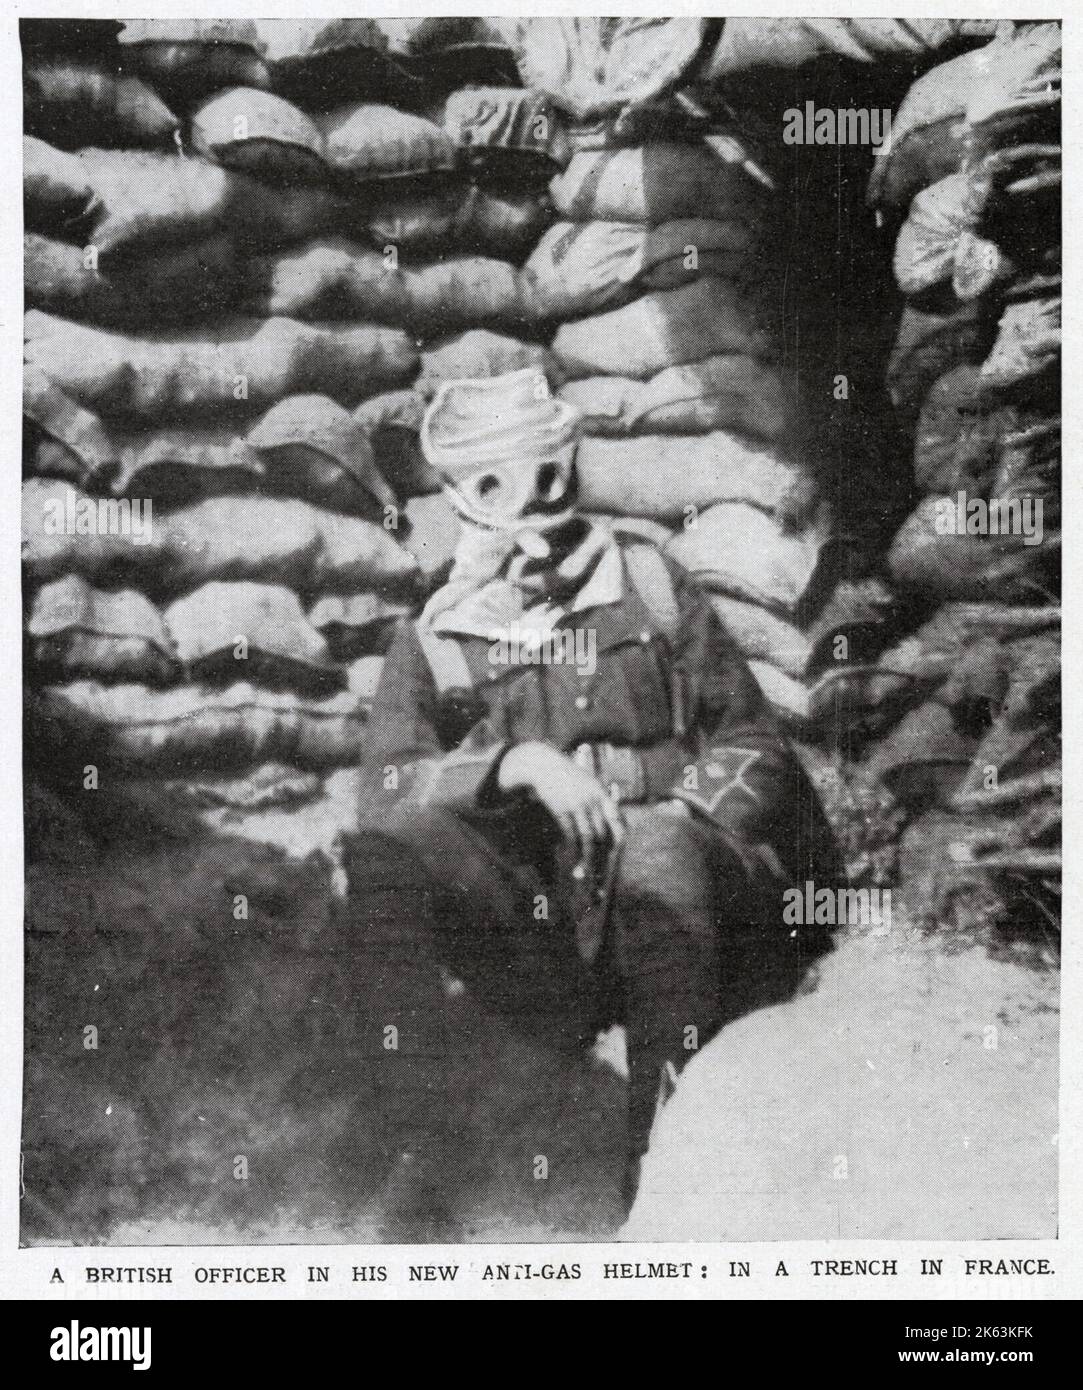 British Officer in 'anti-gas helmet' (gas mask) in trench on Western Front.       Date: 1915 Stock Photo